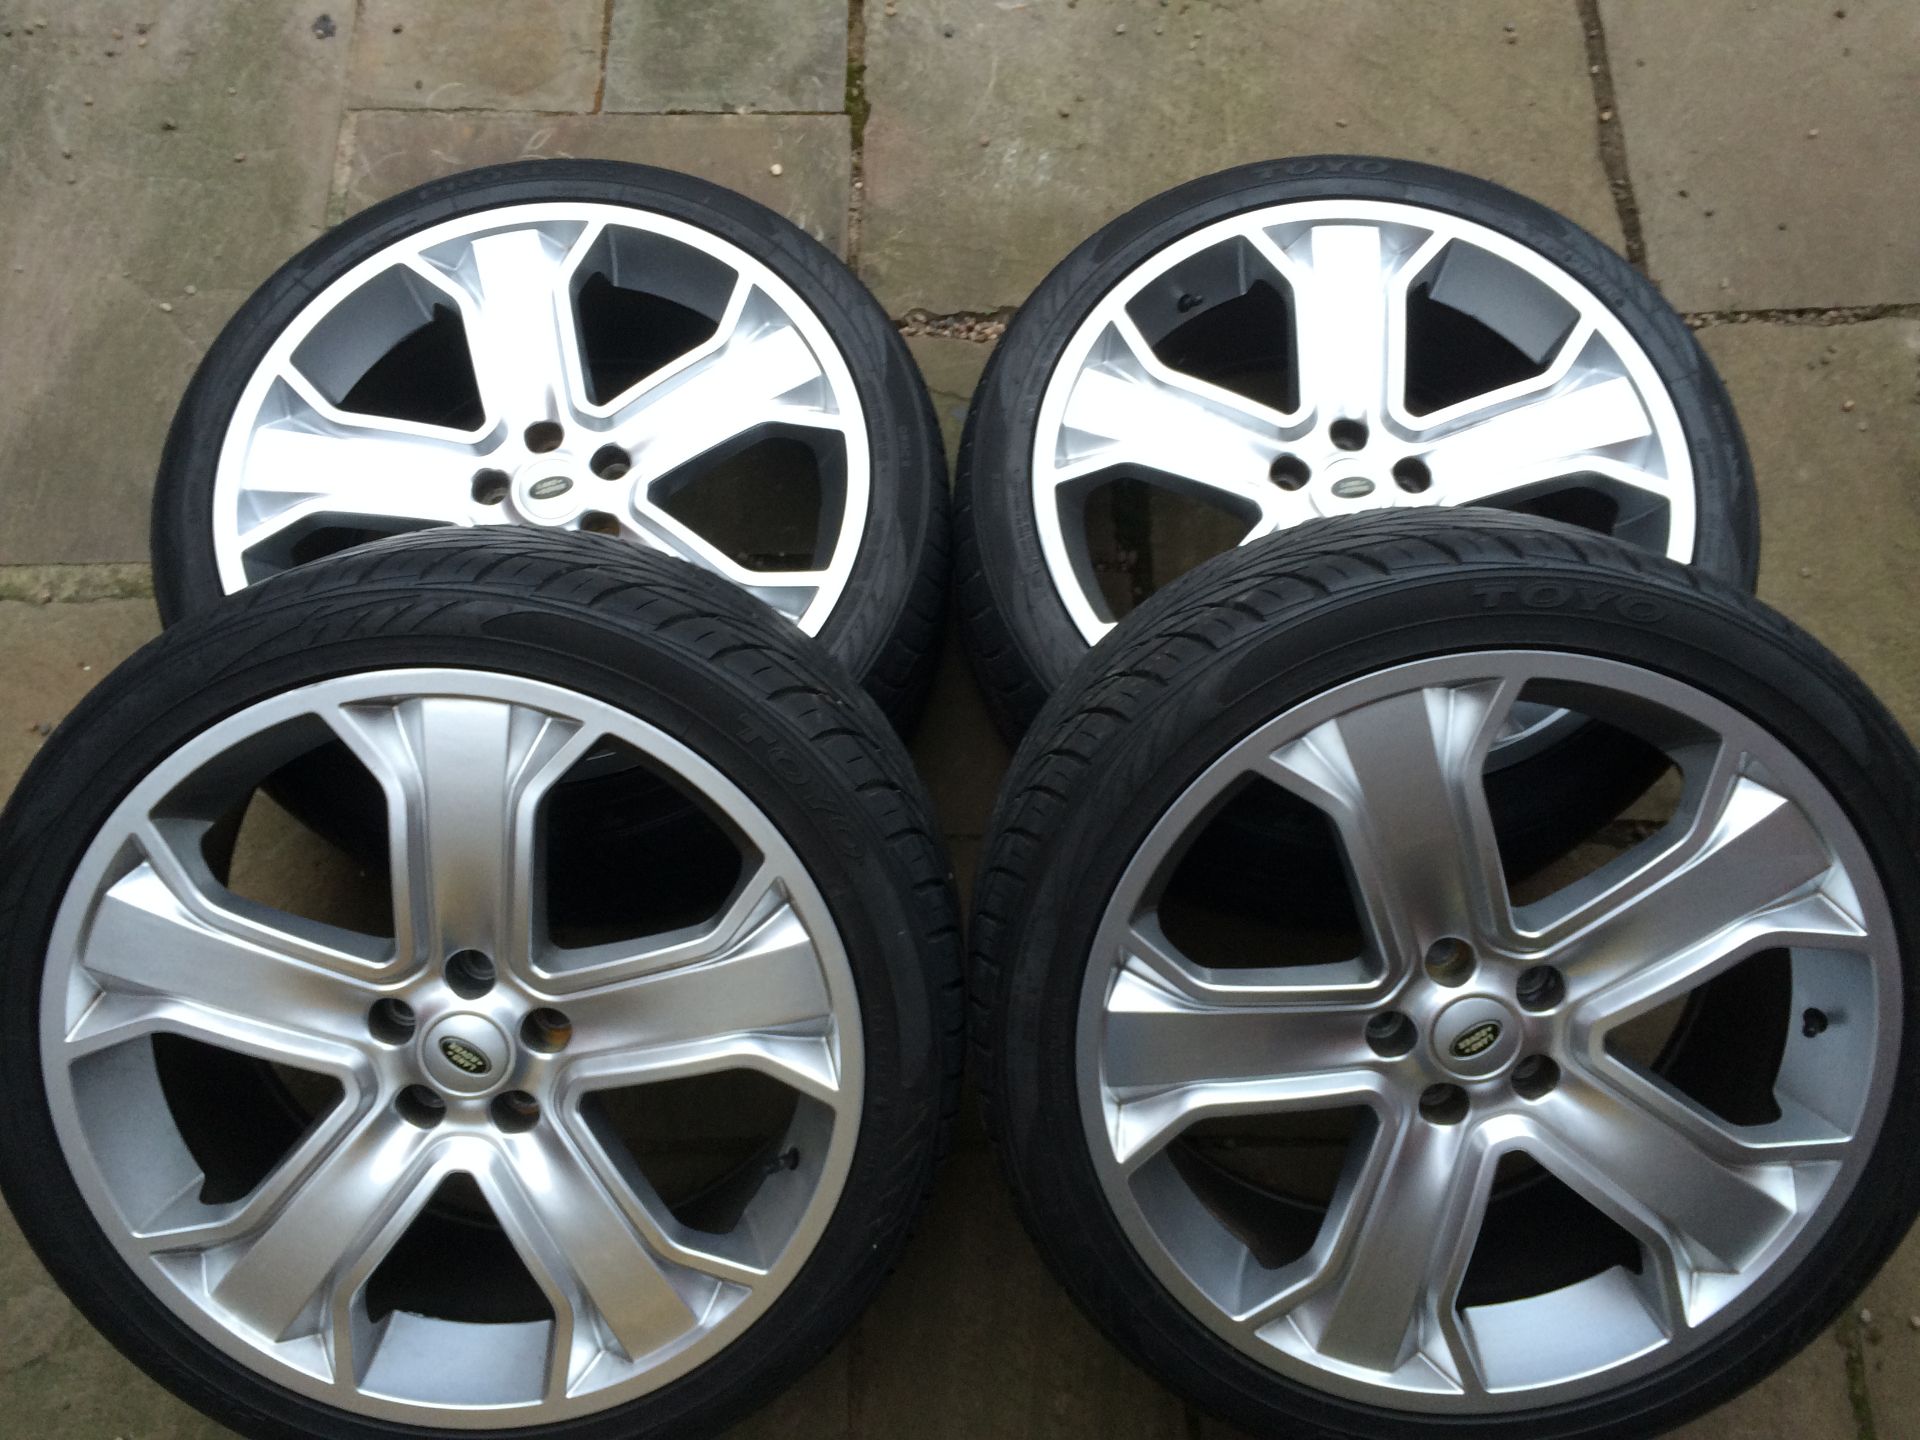 Non Genuine Land Rover, Iron Cross 22” alloy wheels, wrapped in Toyo Proxes S/T’s